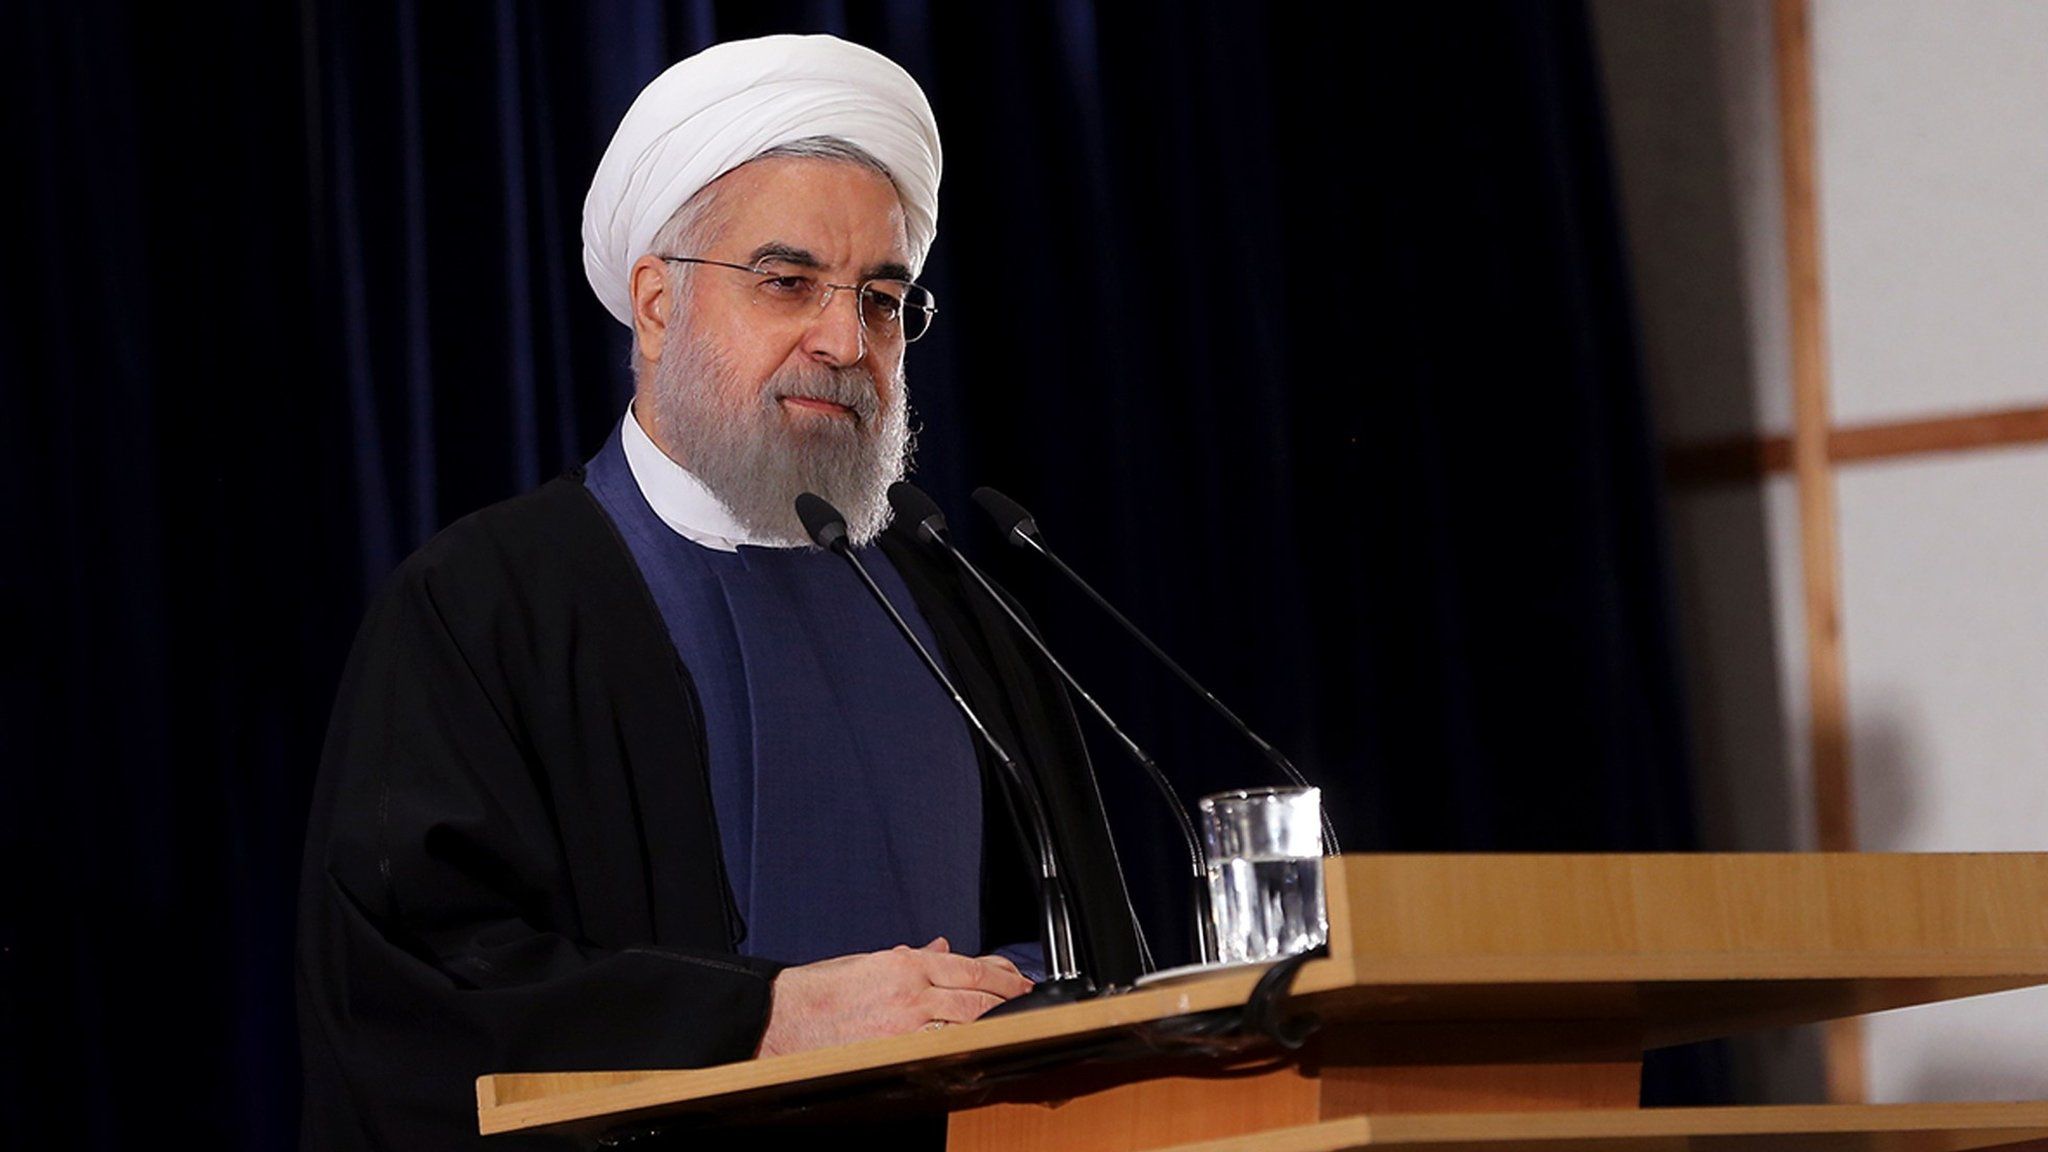 Hassan Rouhani delivers a speech to provincial governors in Tehran on 21 January 2016